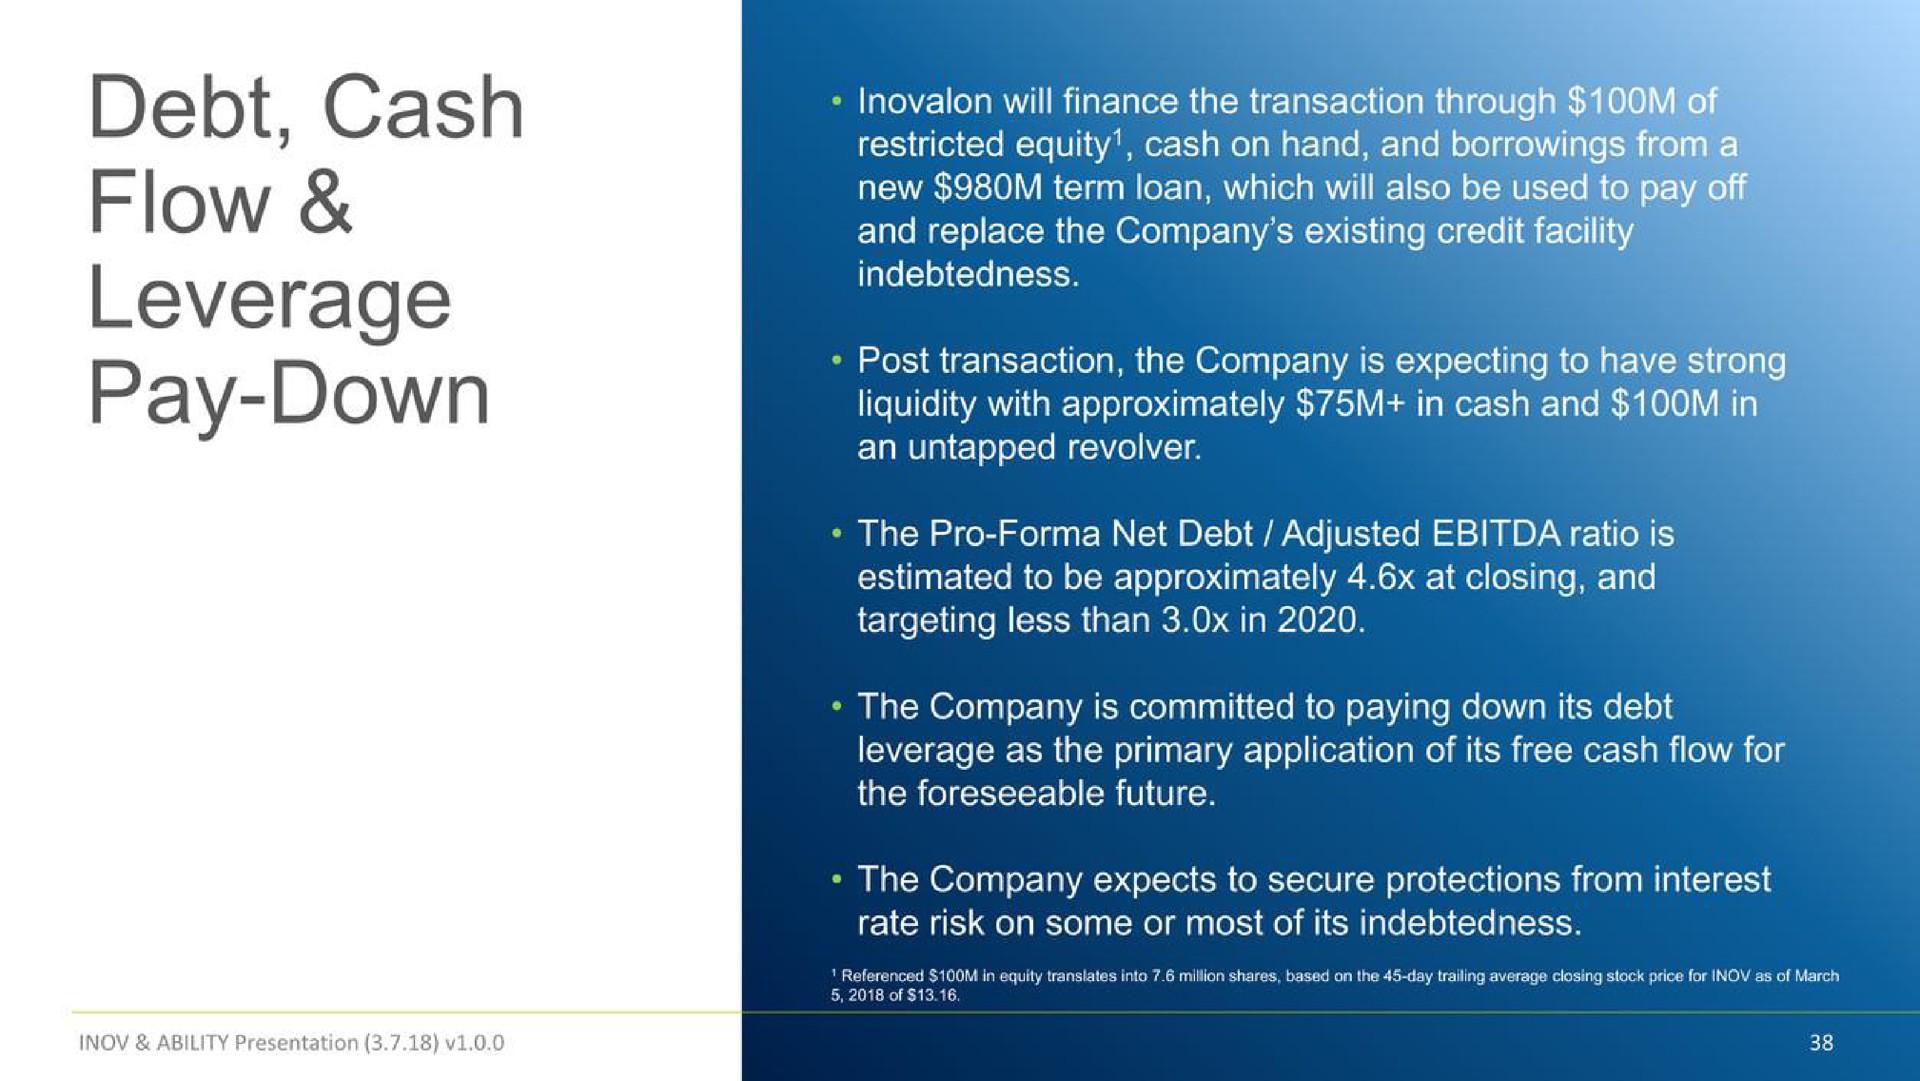 debt cash flow leverage pay down restricted equity cash on hand and borrowings | Inovalon